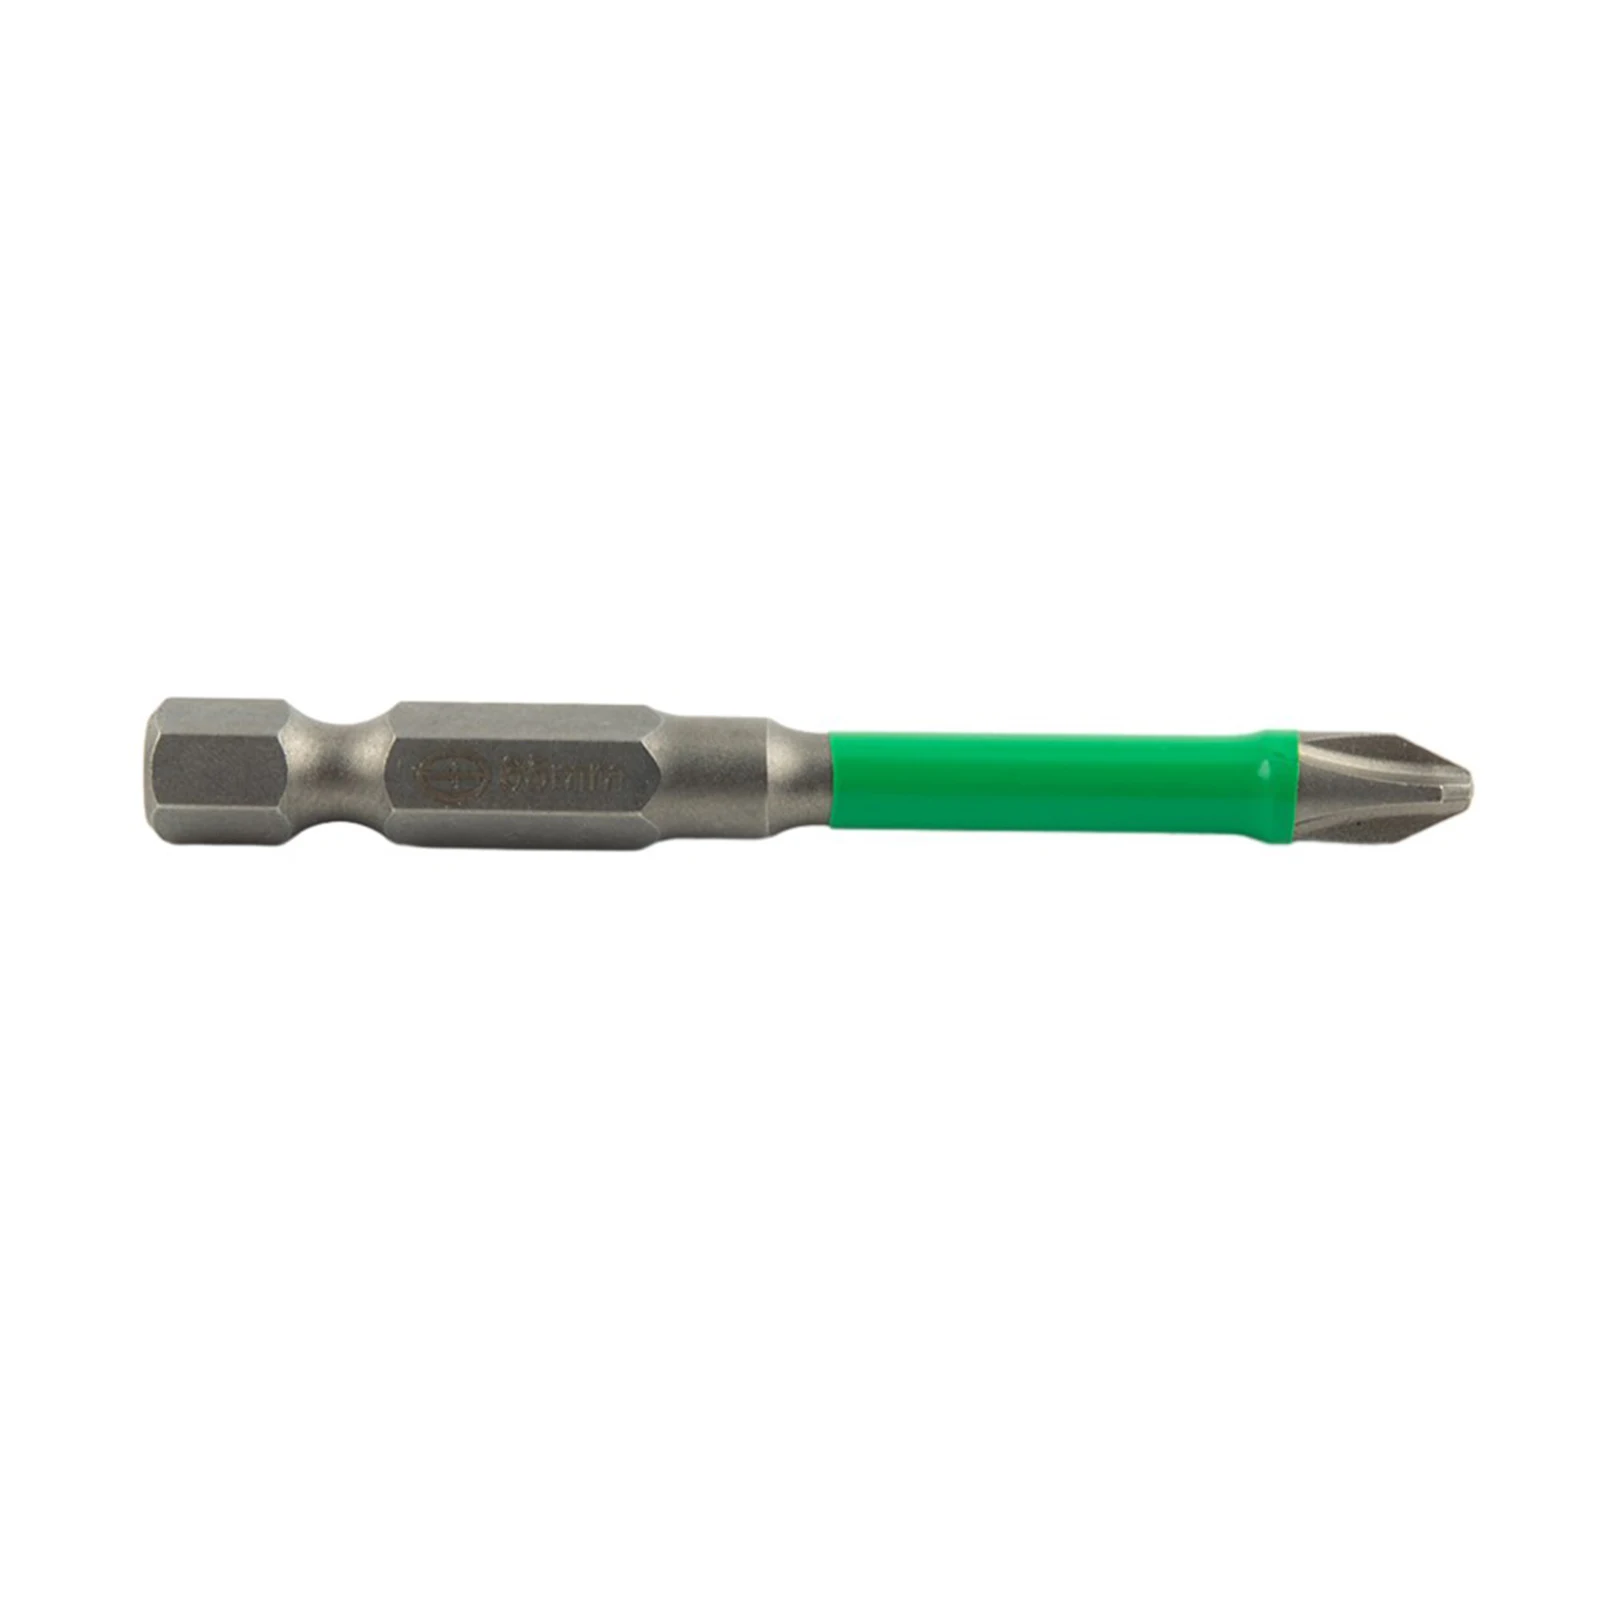 

Batch Head Screwdriver Bit Magnetic Power Tools 110mm Cross FPH2 For Socket Screwdriver Bit Slotted Special Nutdrivers Driver